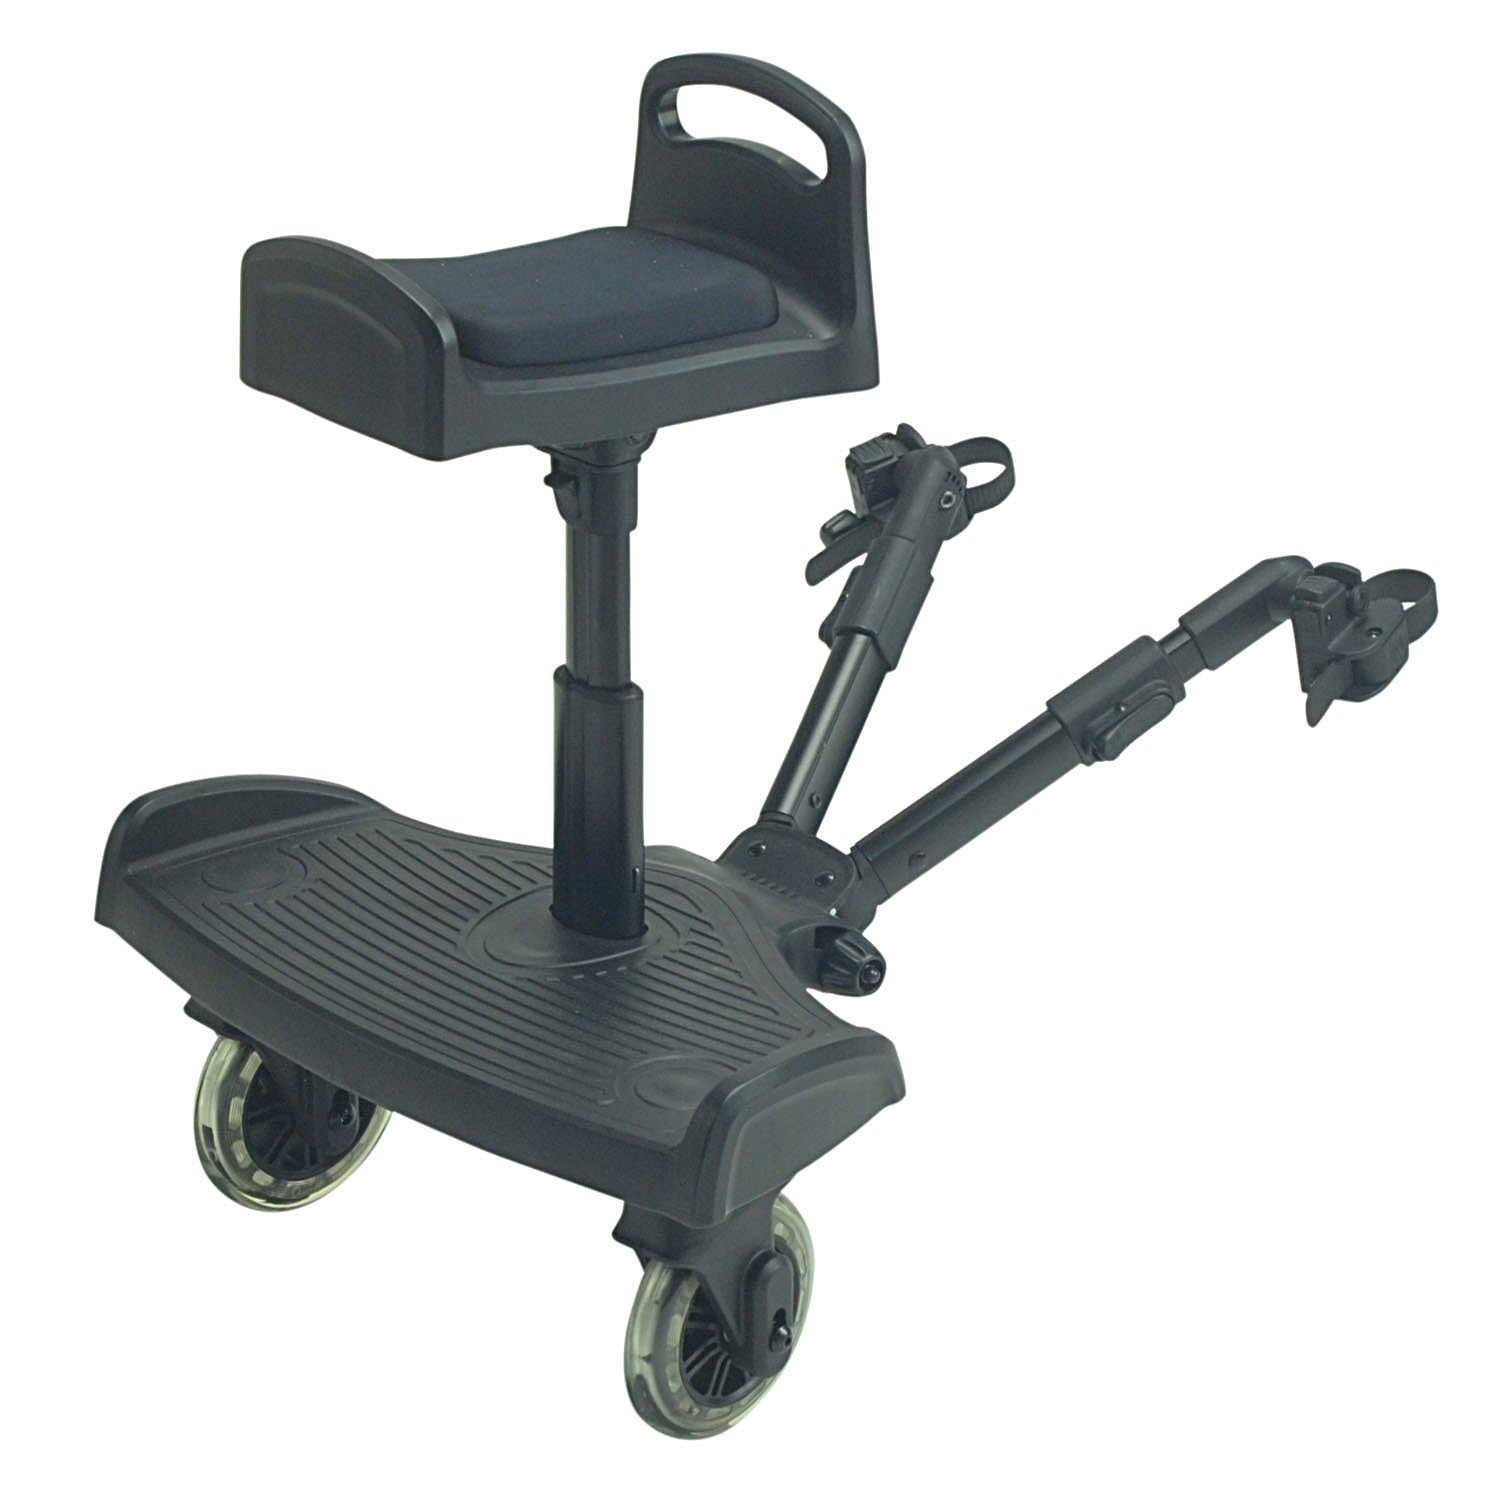 For-Your-Little-Ride On Board Compatible Travel Systems, Teutonia Cosmo